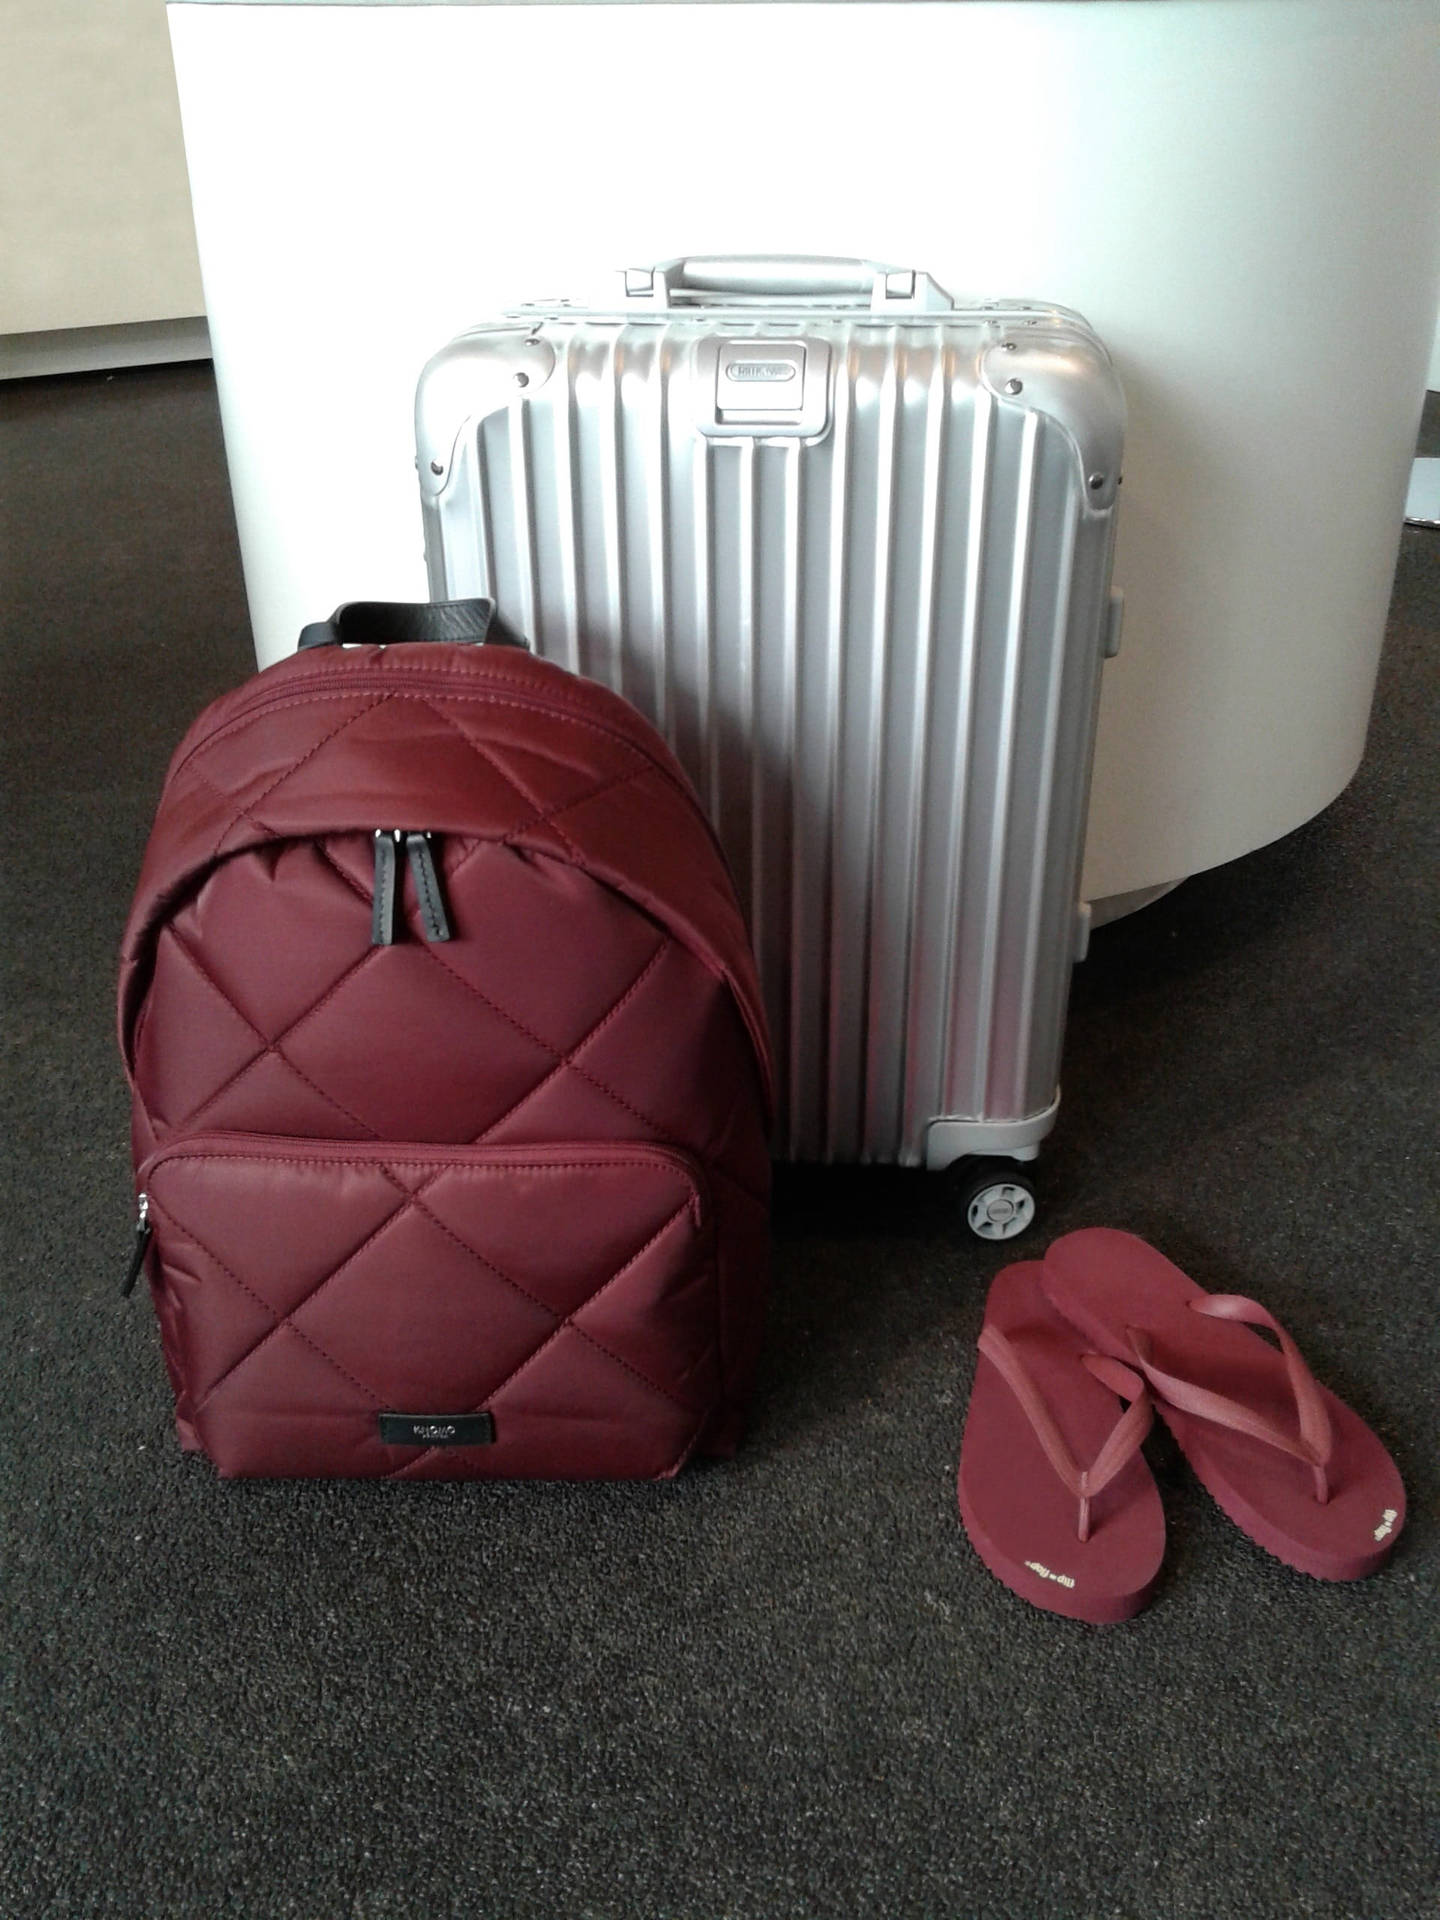 Silver Rimowa Suitcase And Maroon Bag Wallpaper